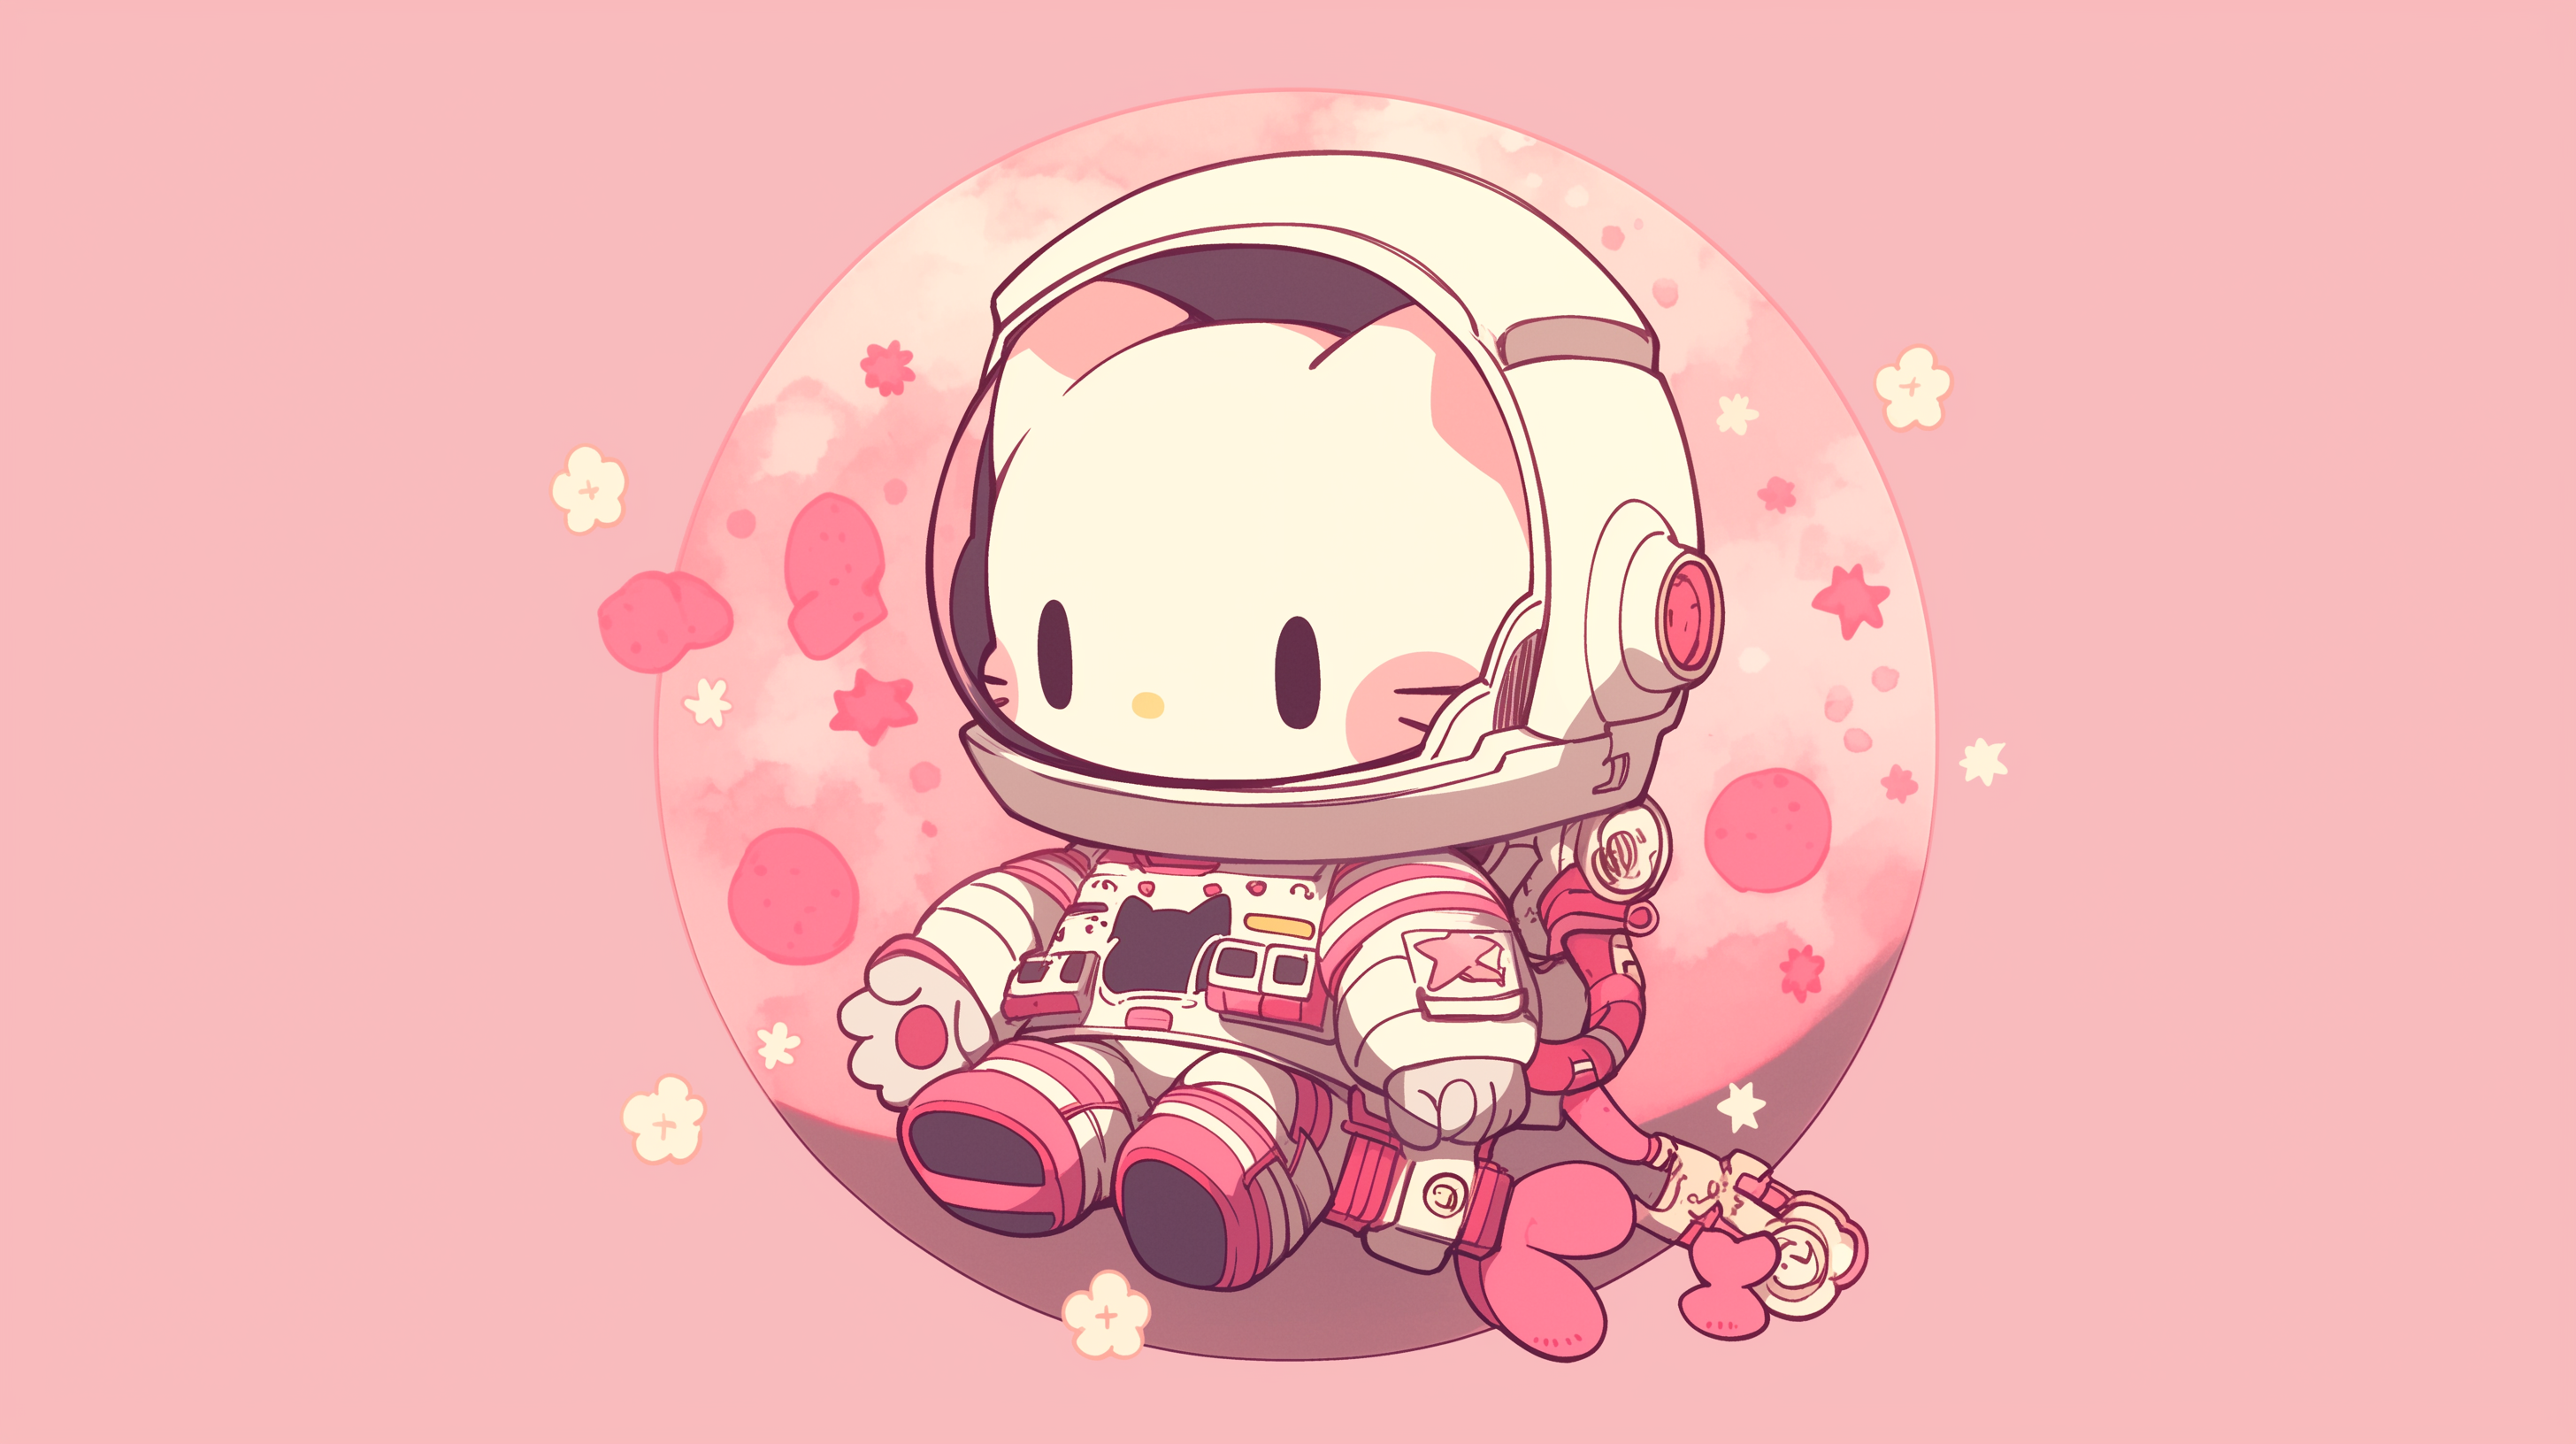 Hello Kitty astronaut illustration on a pastel pink background, perfect for HD desktop wallpaper and background use.